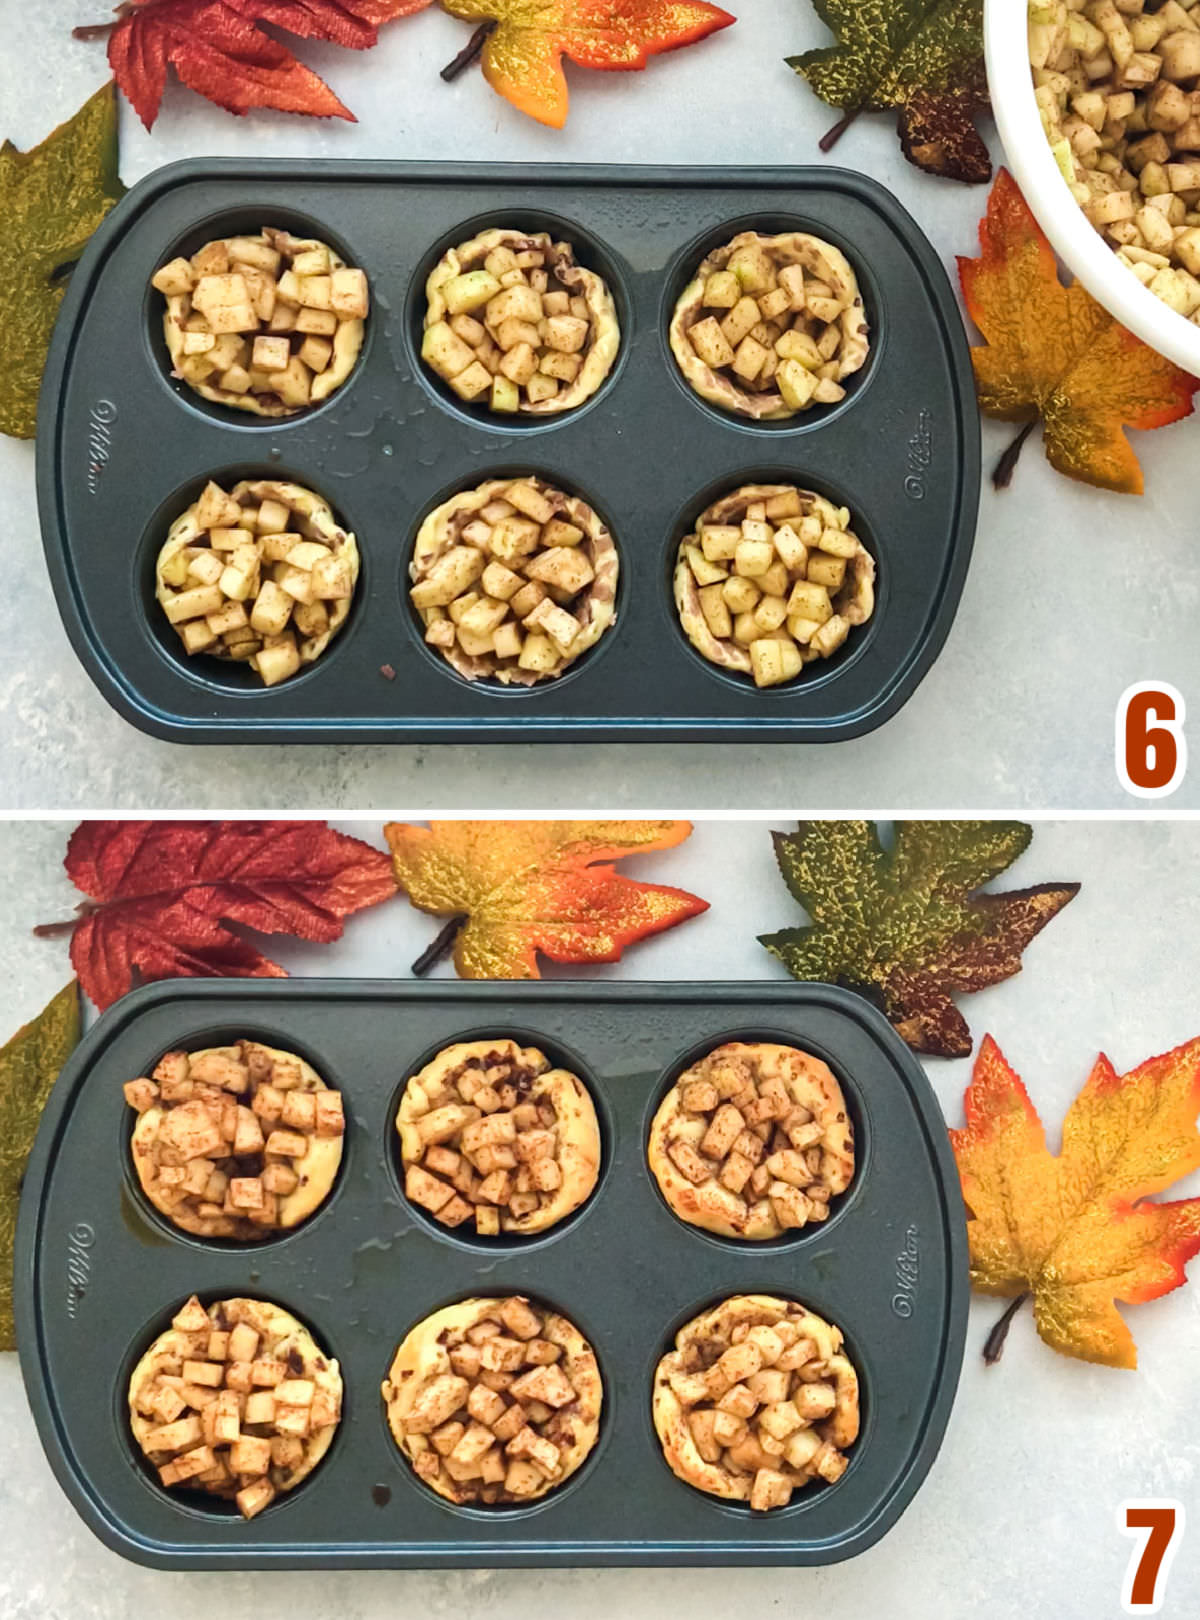 Collage image showing the Apple Cinnamon Rolls before they go in the oven and after then come out of the oven.